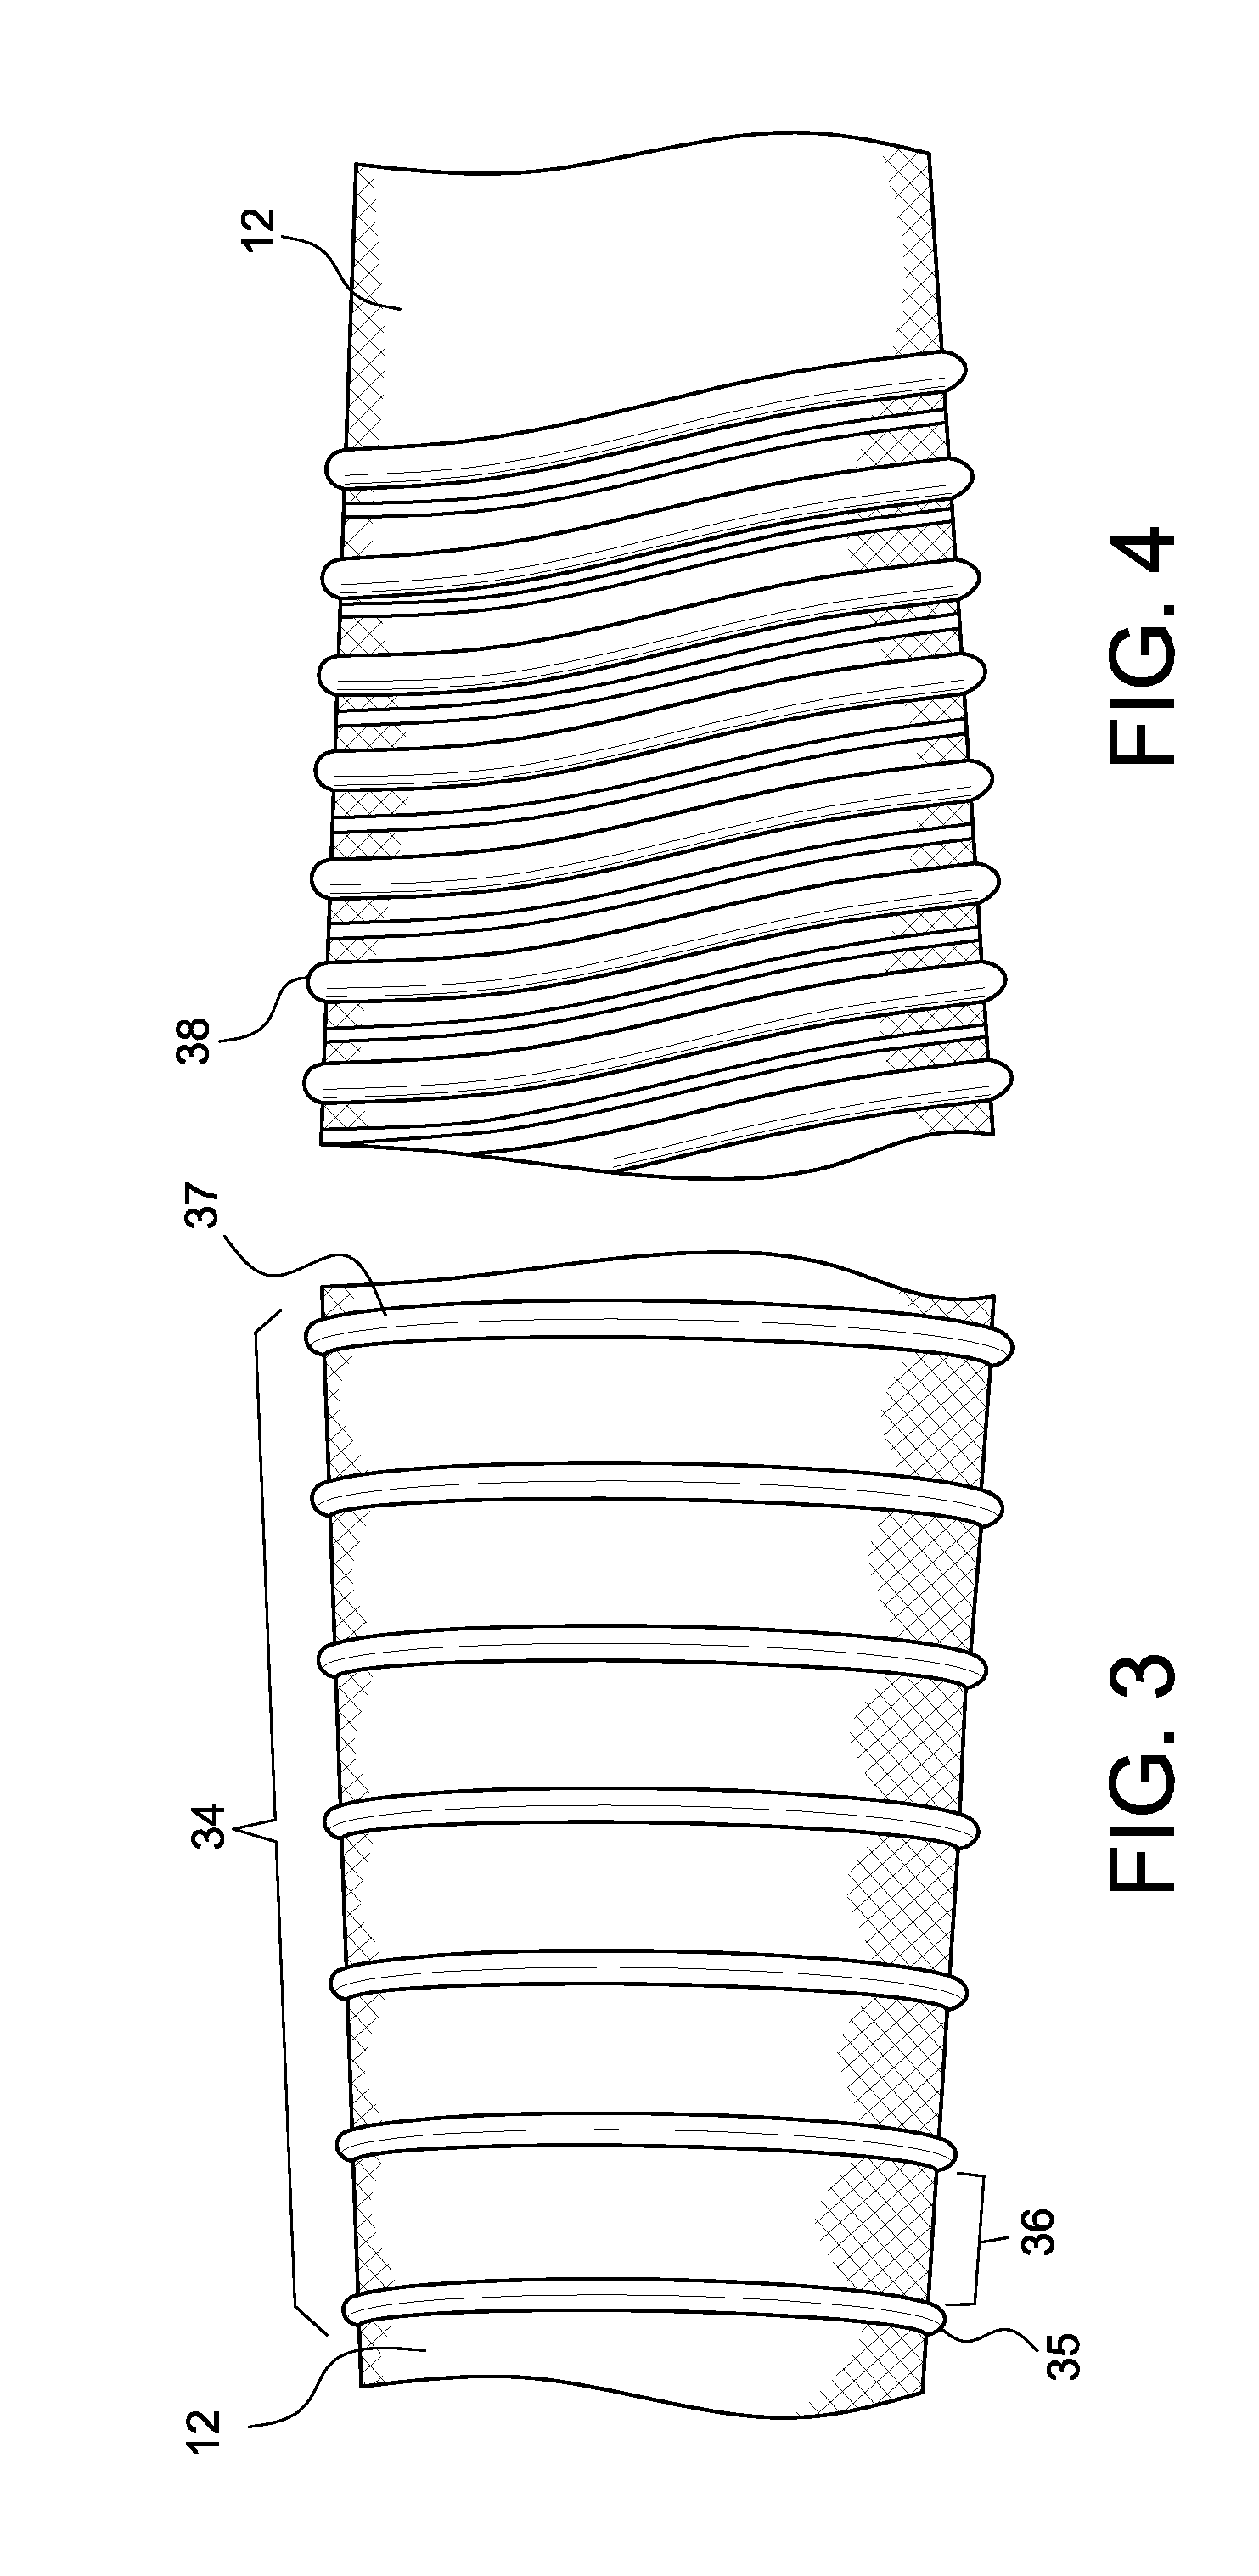 Adjustable seal system, seal component and method for using the same